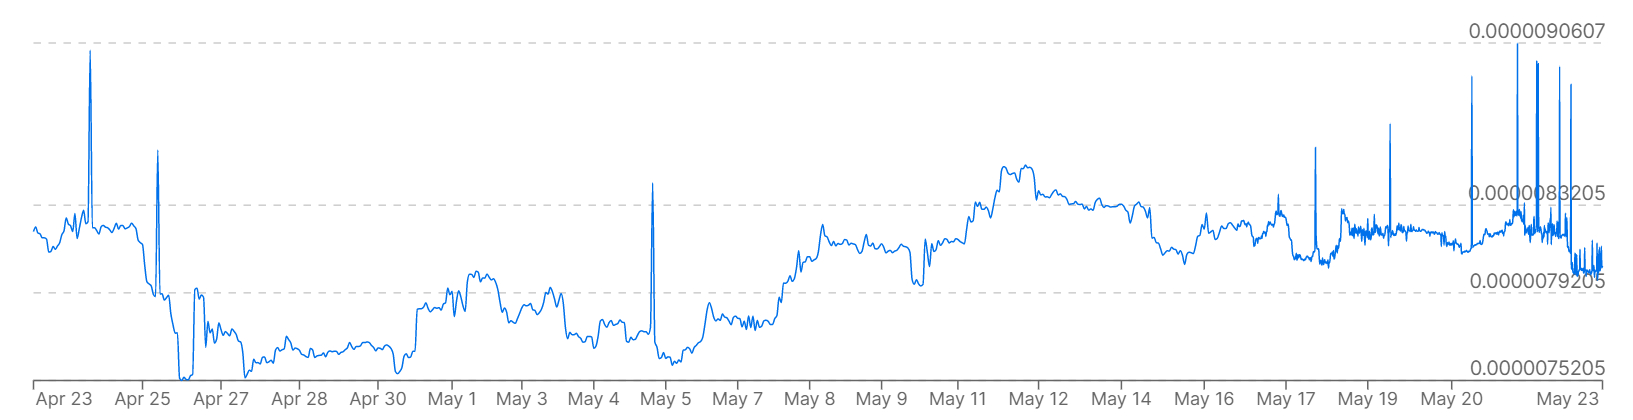 A chart showing Bitcoin prices versus the Malaysian ringgit over the past month.